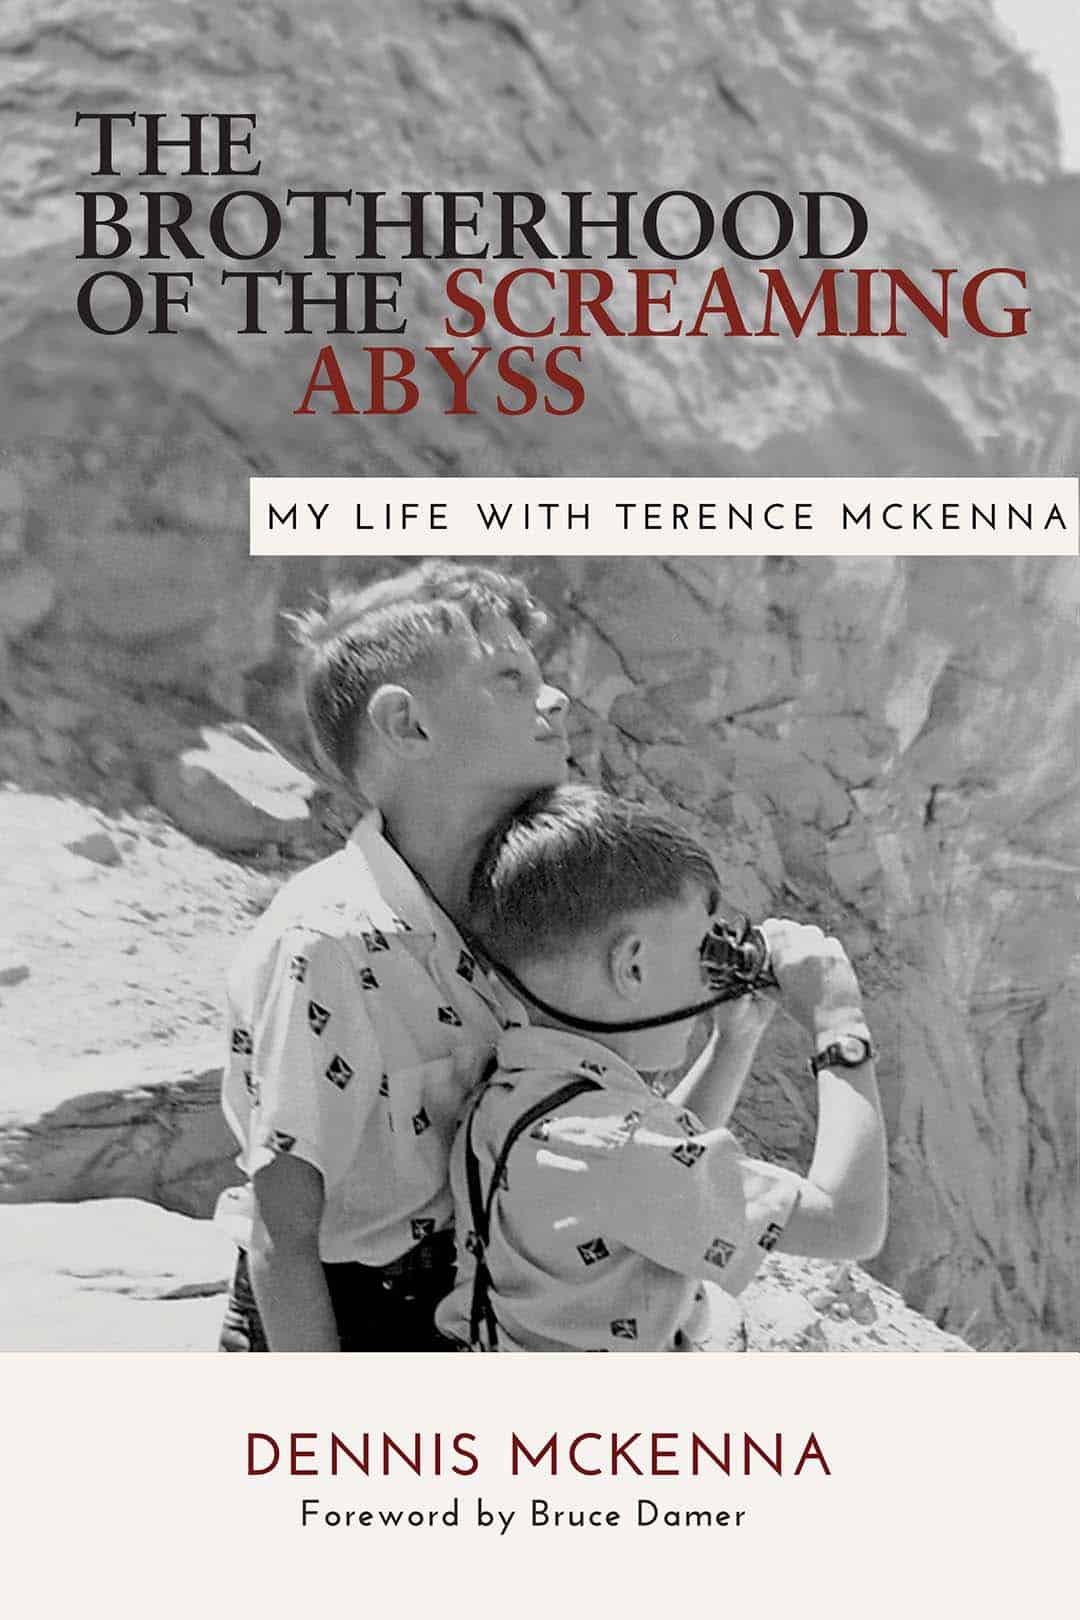 Brotherhood of the Screaming Abyss: My Life with Terence McKenna